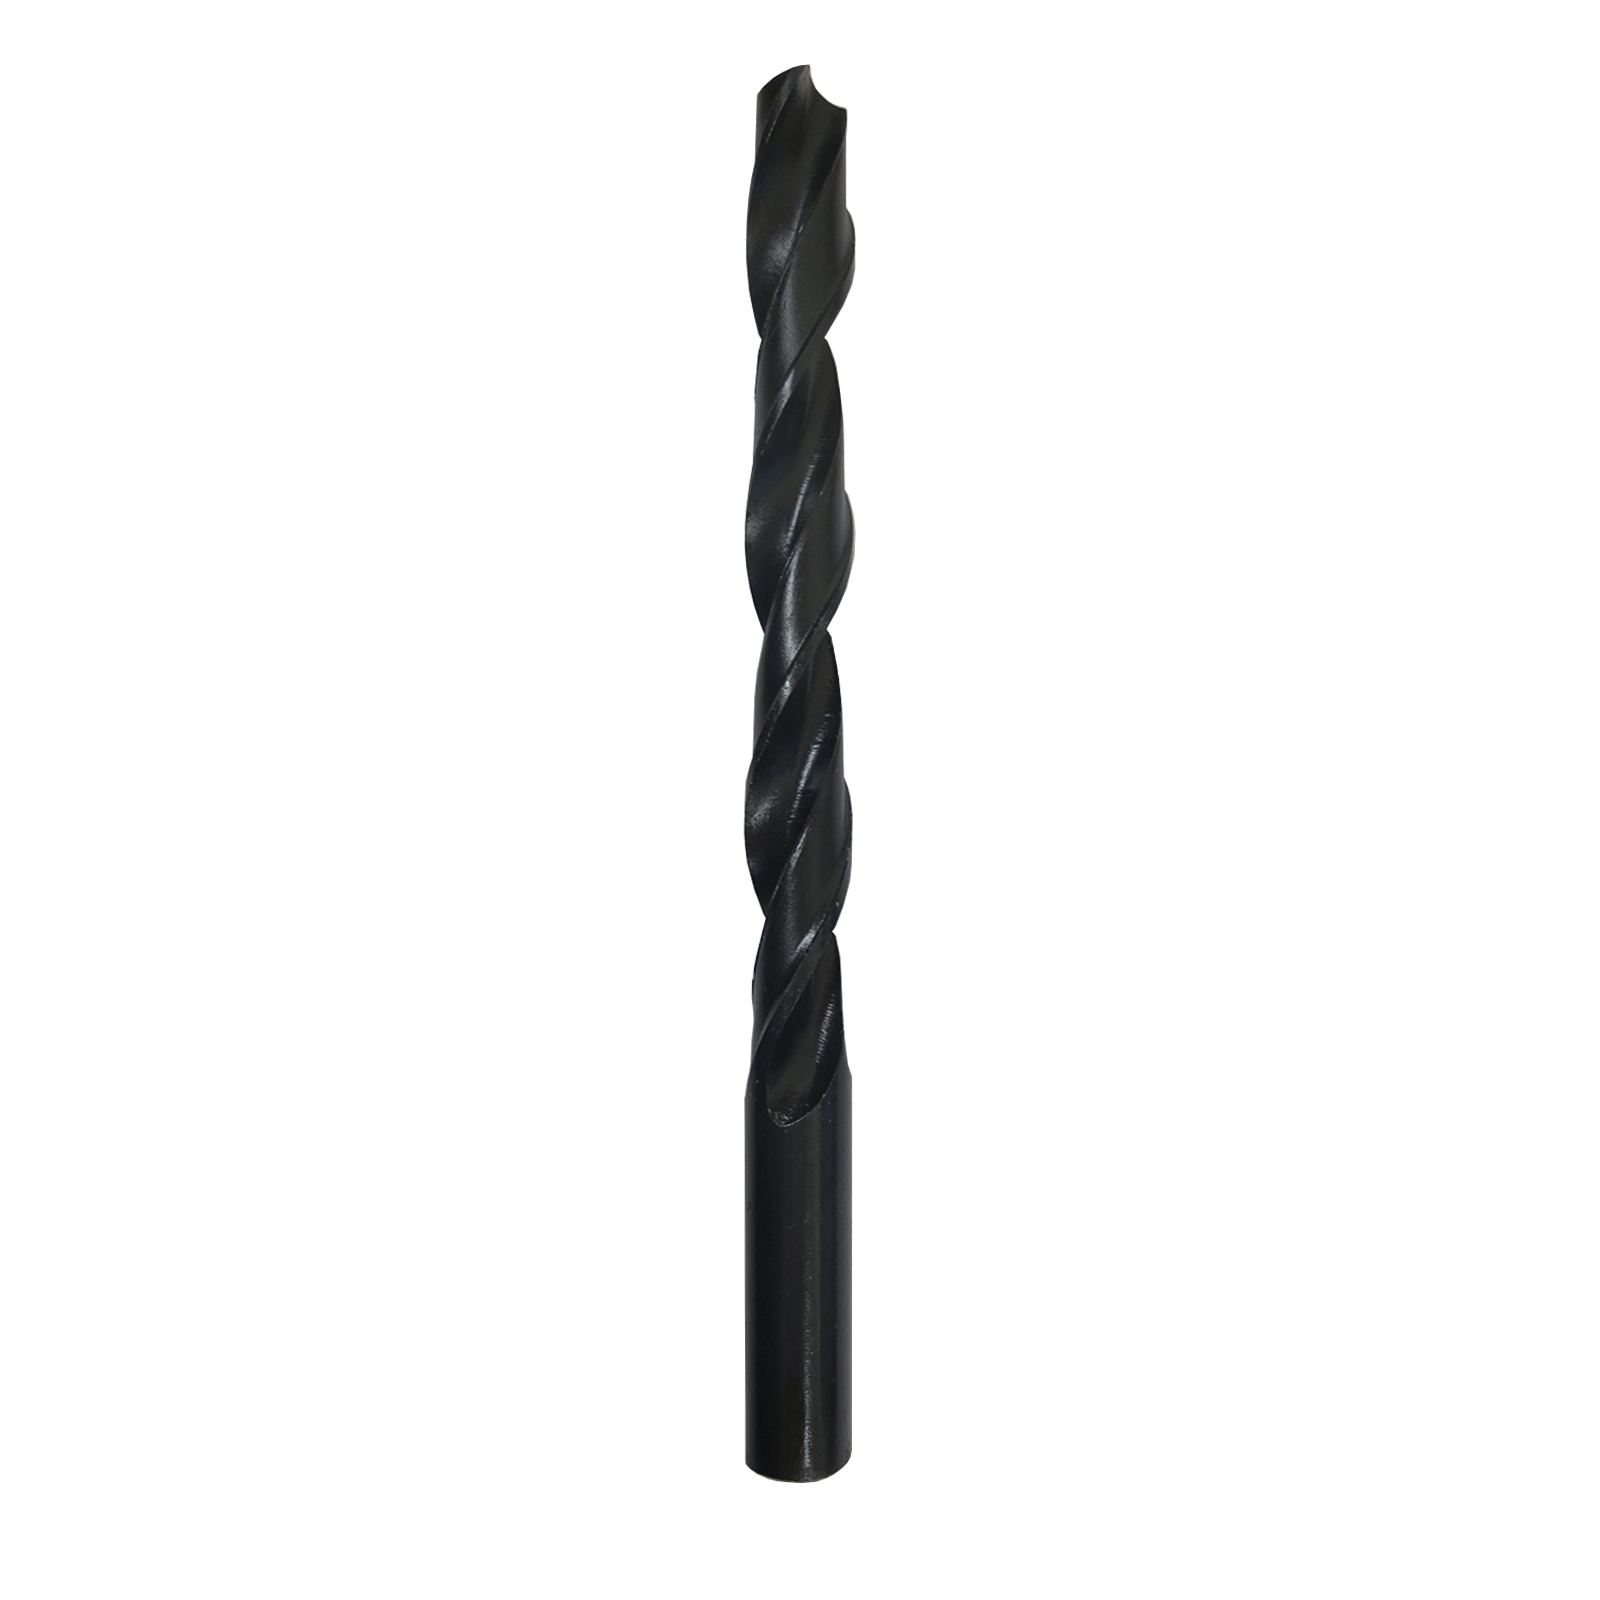 Gyros 45-41003 Premium (Made in US) Industrial HSS Black Oxide Drill Bit, Size # 3 , Pack of 12